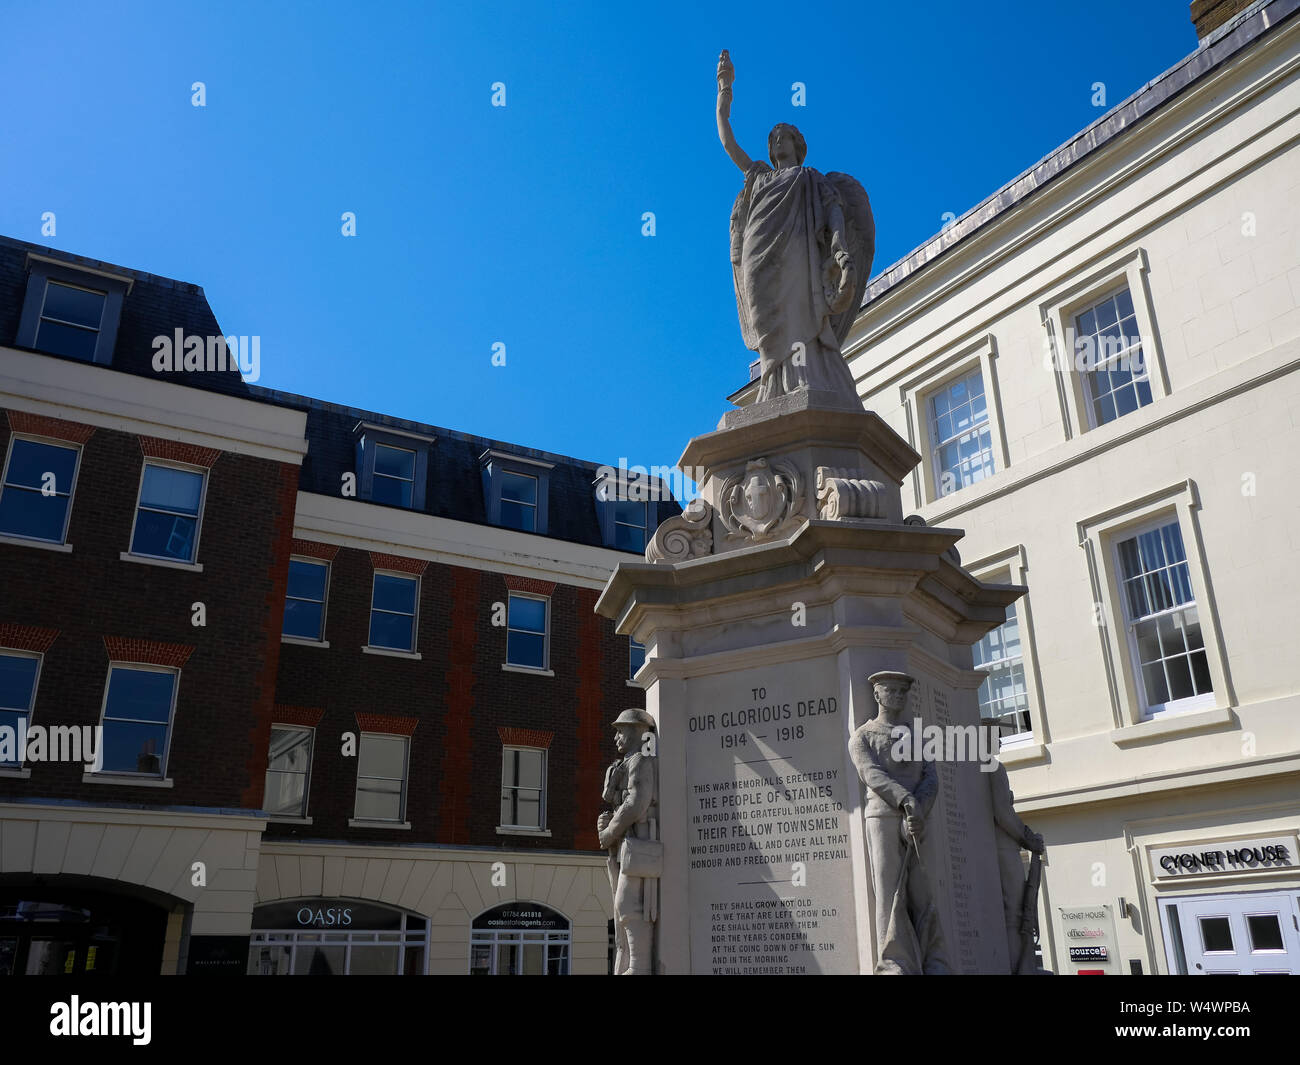 Staines-on-Thames, War Memorial, Market Square, Surrey, England, UK, GB. Stock Photo